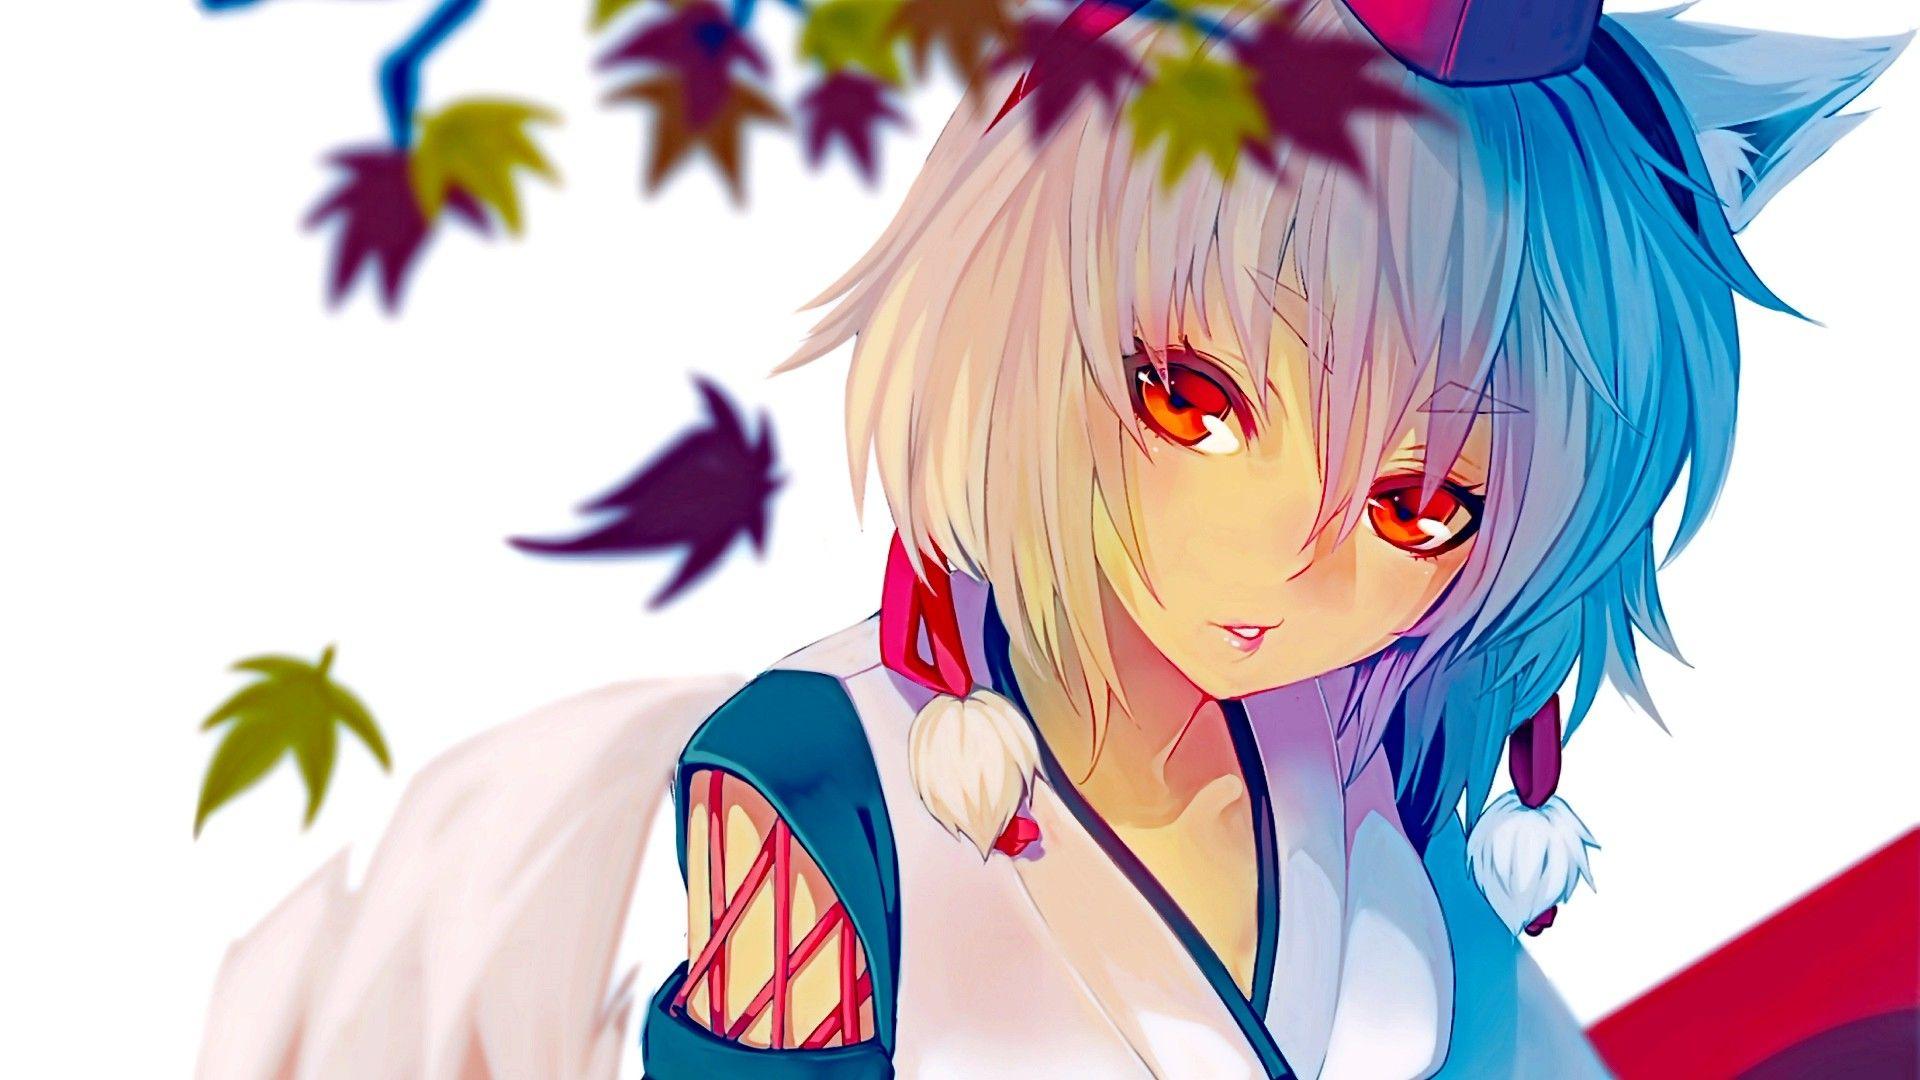 Beautiful Wolf Girl / Cat Girl With White Hair And Red Eyes